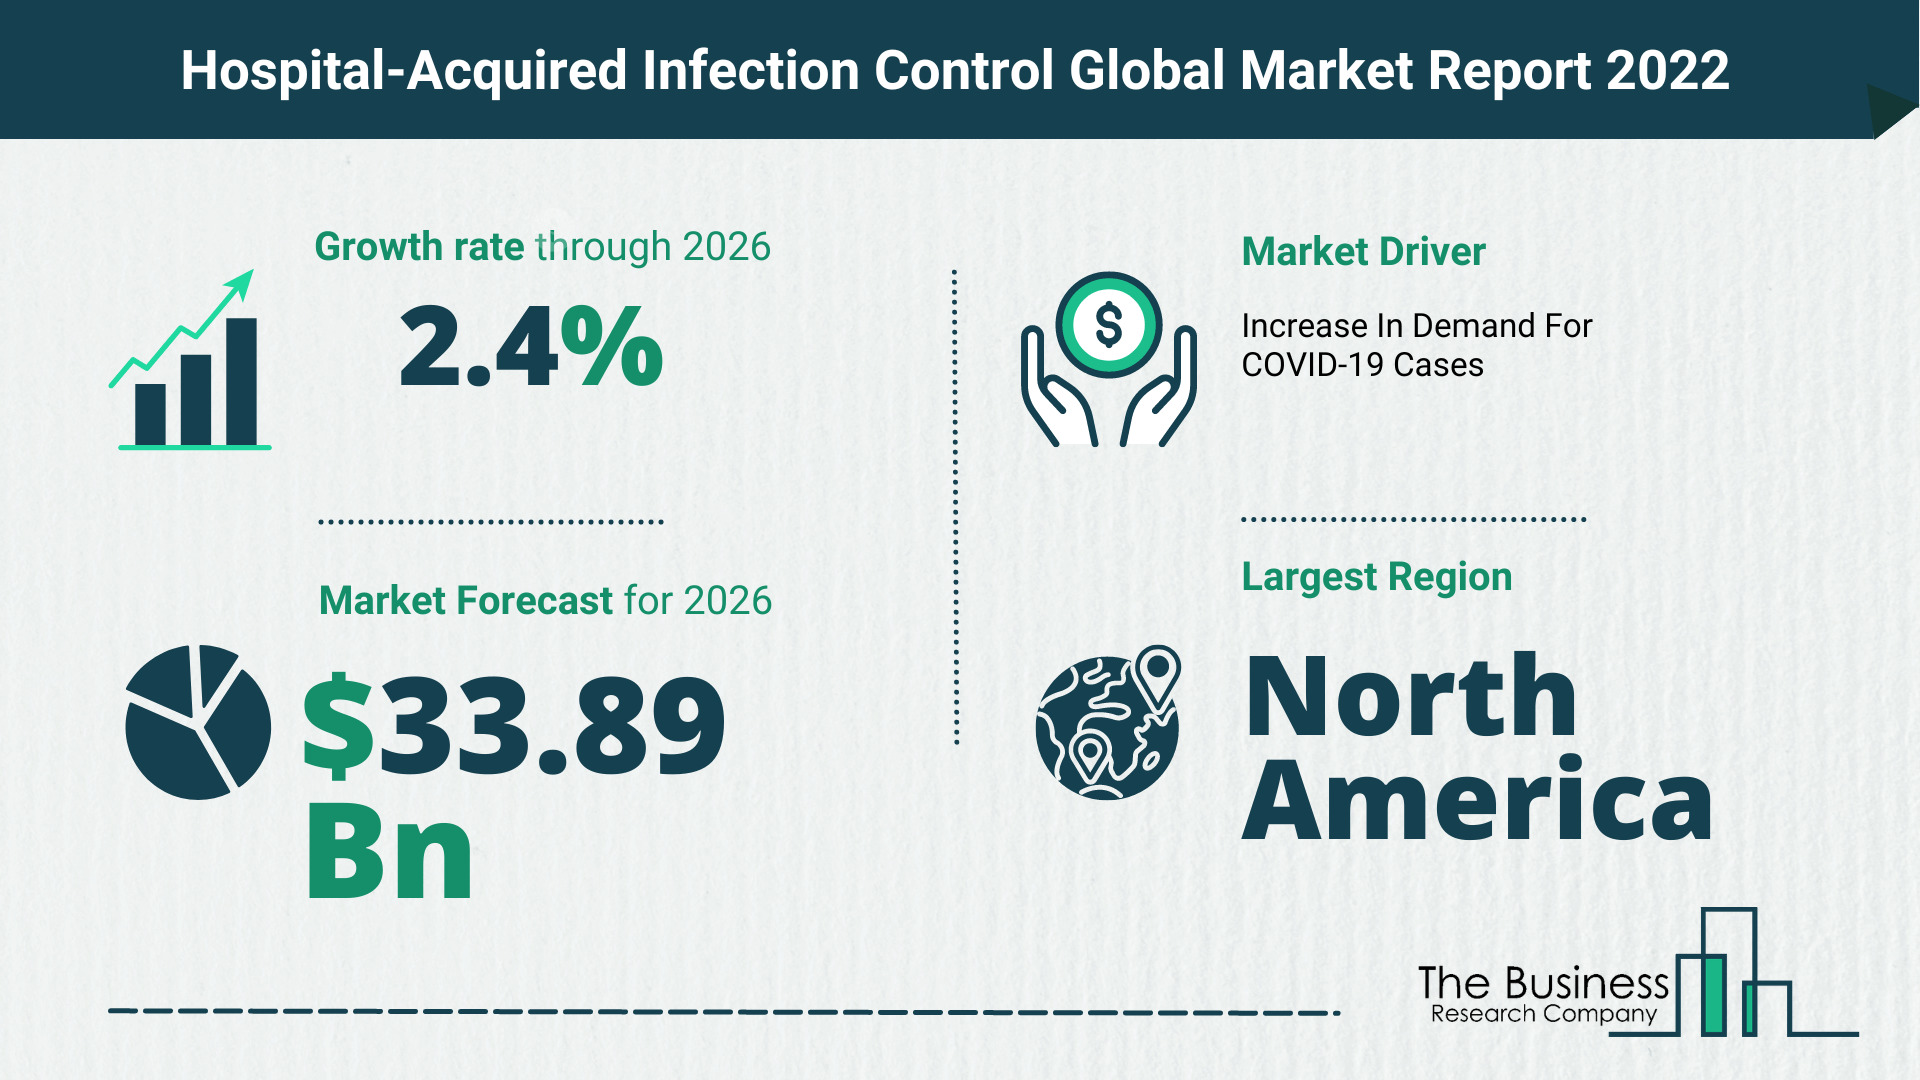 Global Hospital-Acquired Infection Control Market 2022 – Market Opportunities And Strategies